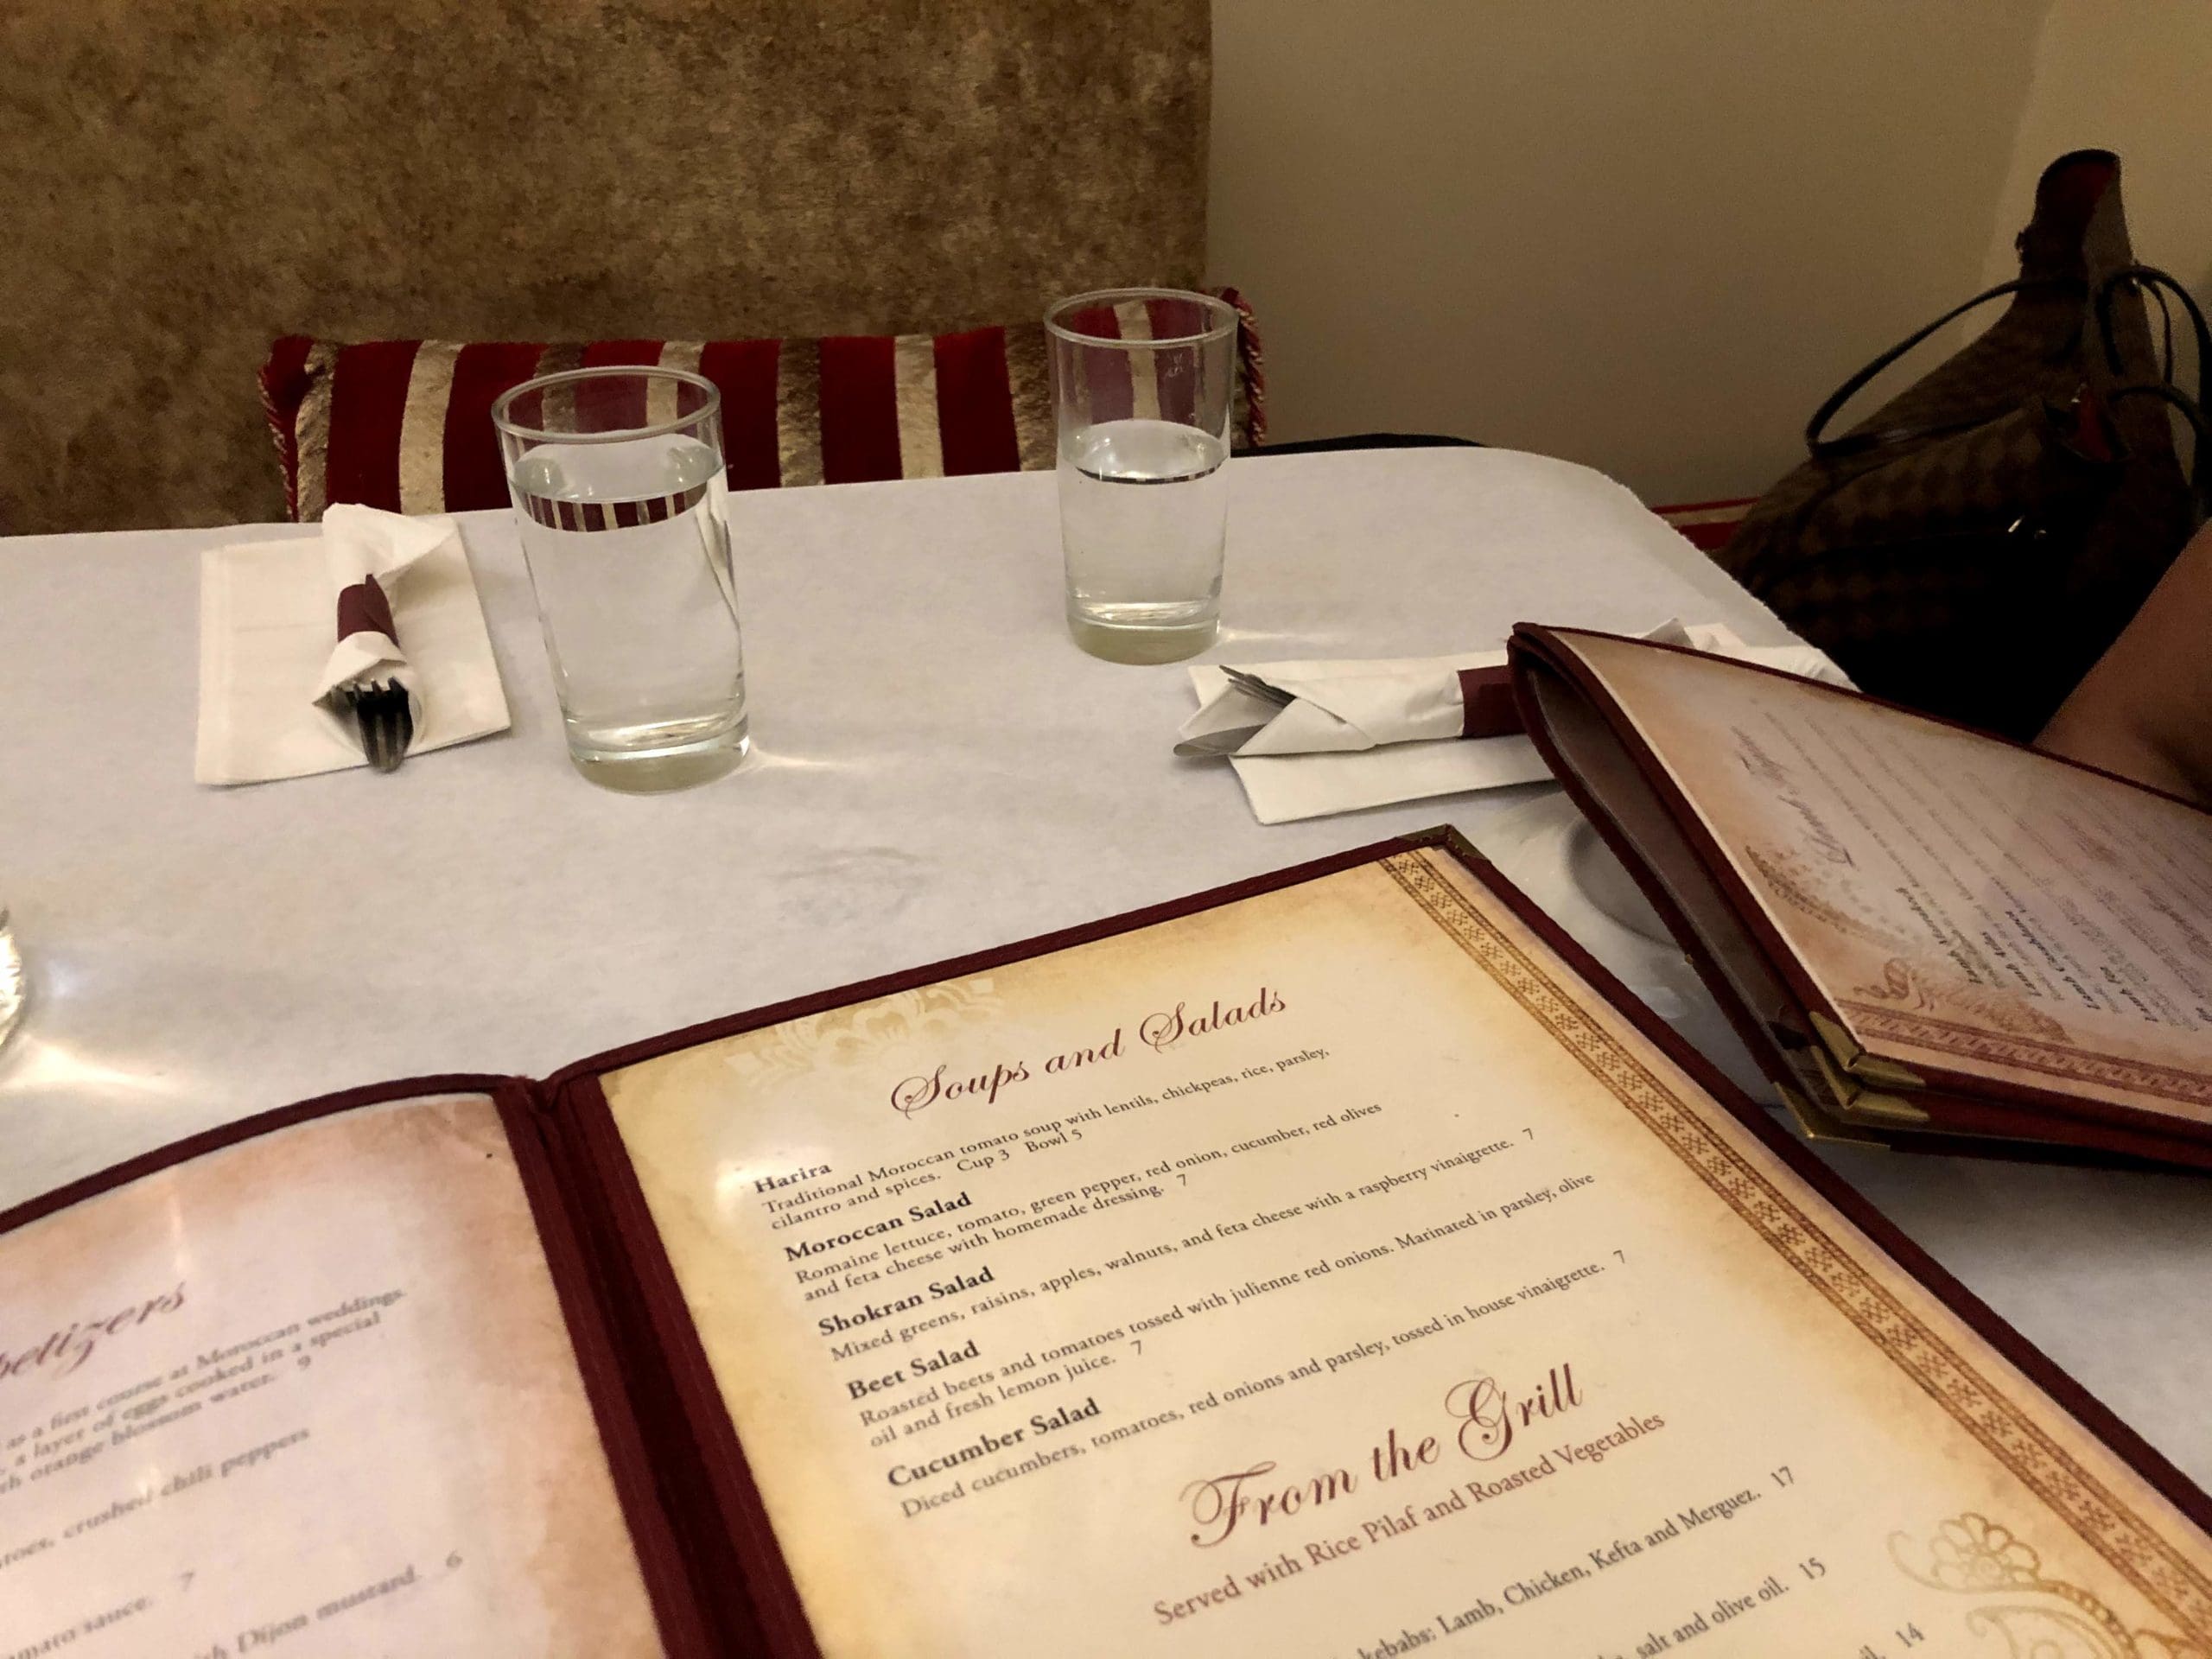 Restaurant with table and menus open